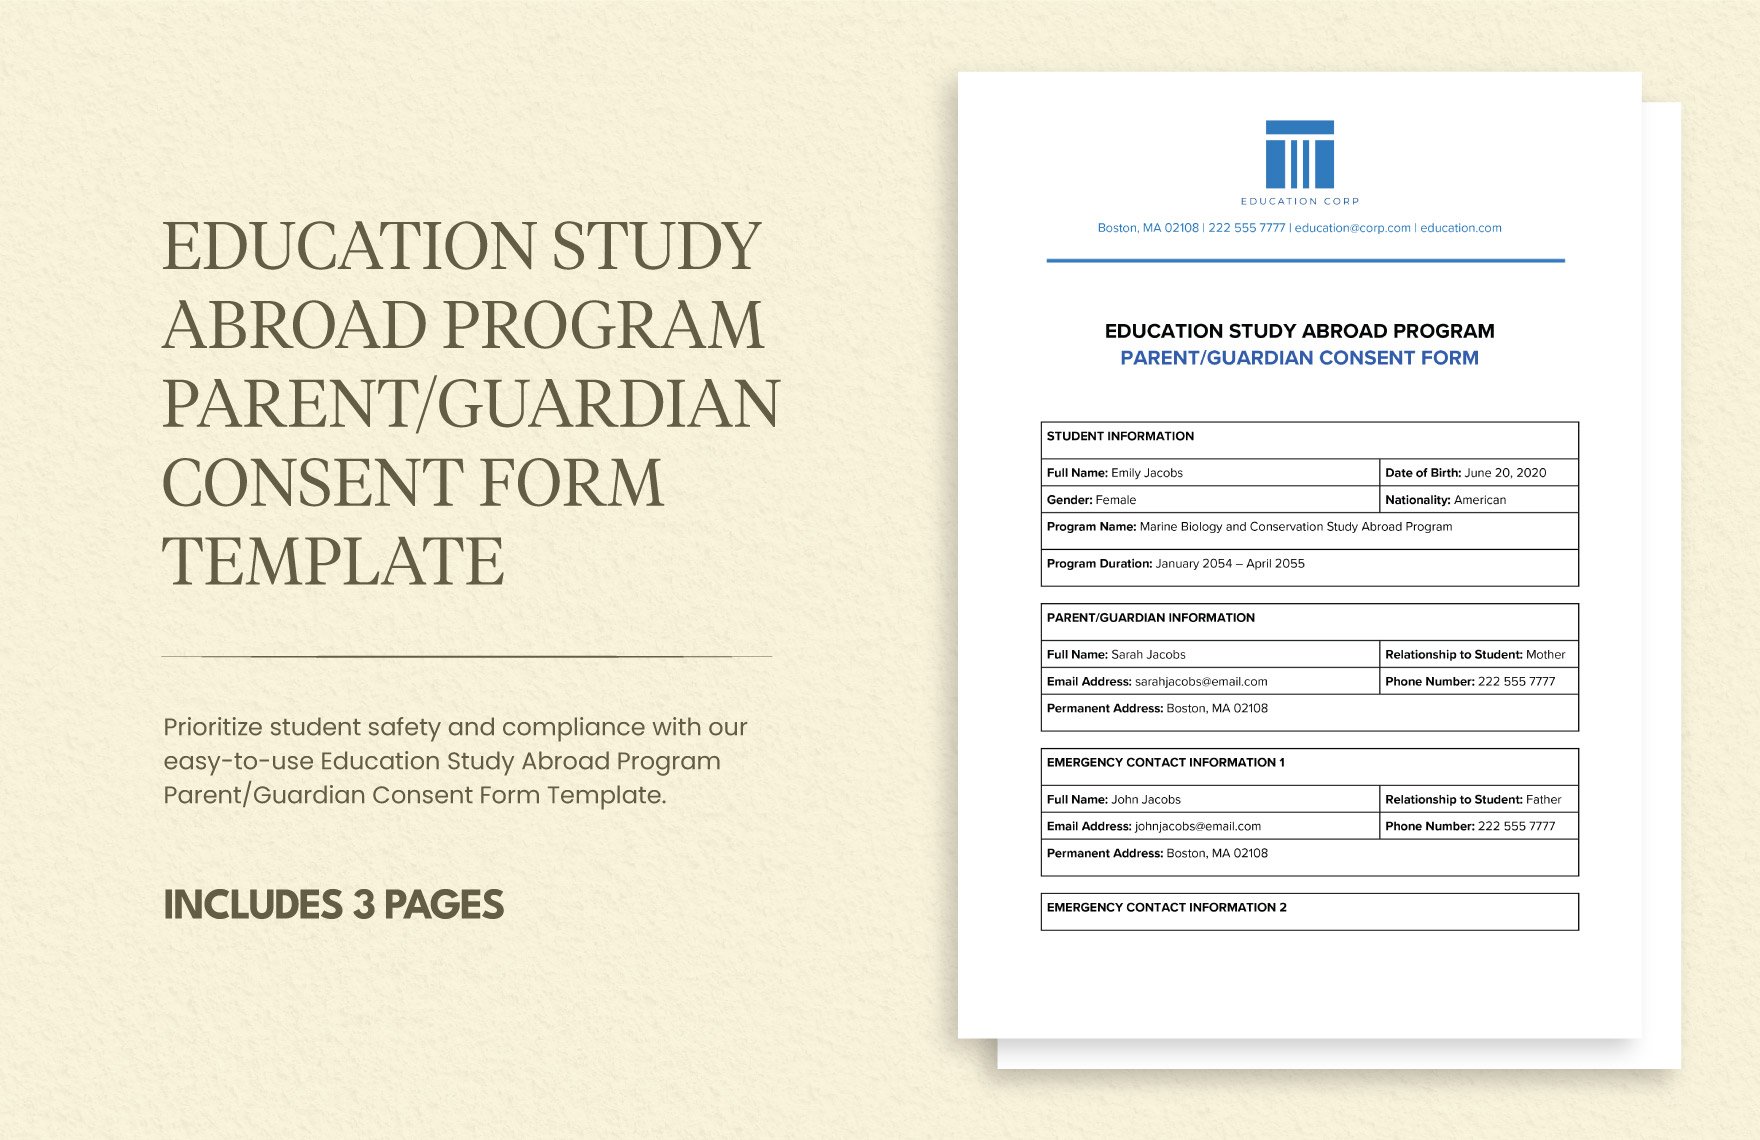 Education Study Abroad Program Parent/Guardian Consent Form Template in Word, Google Docs, PDF